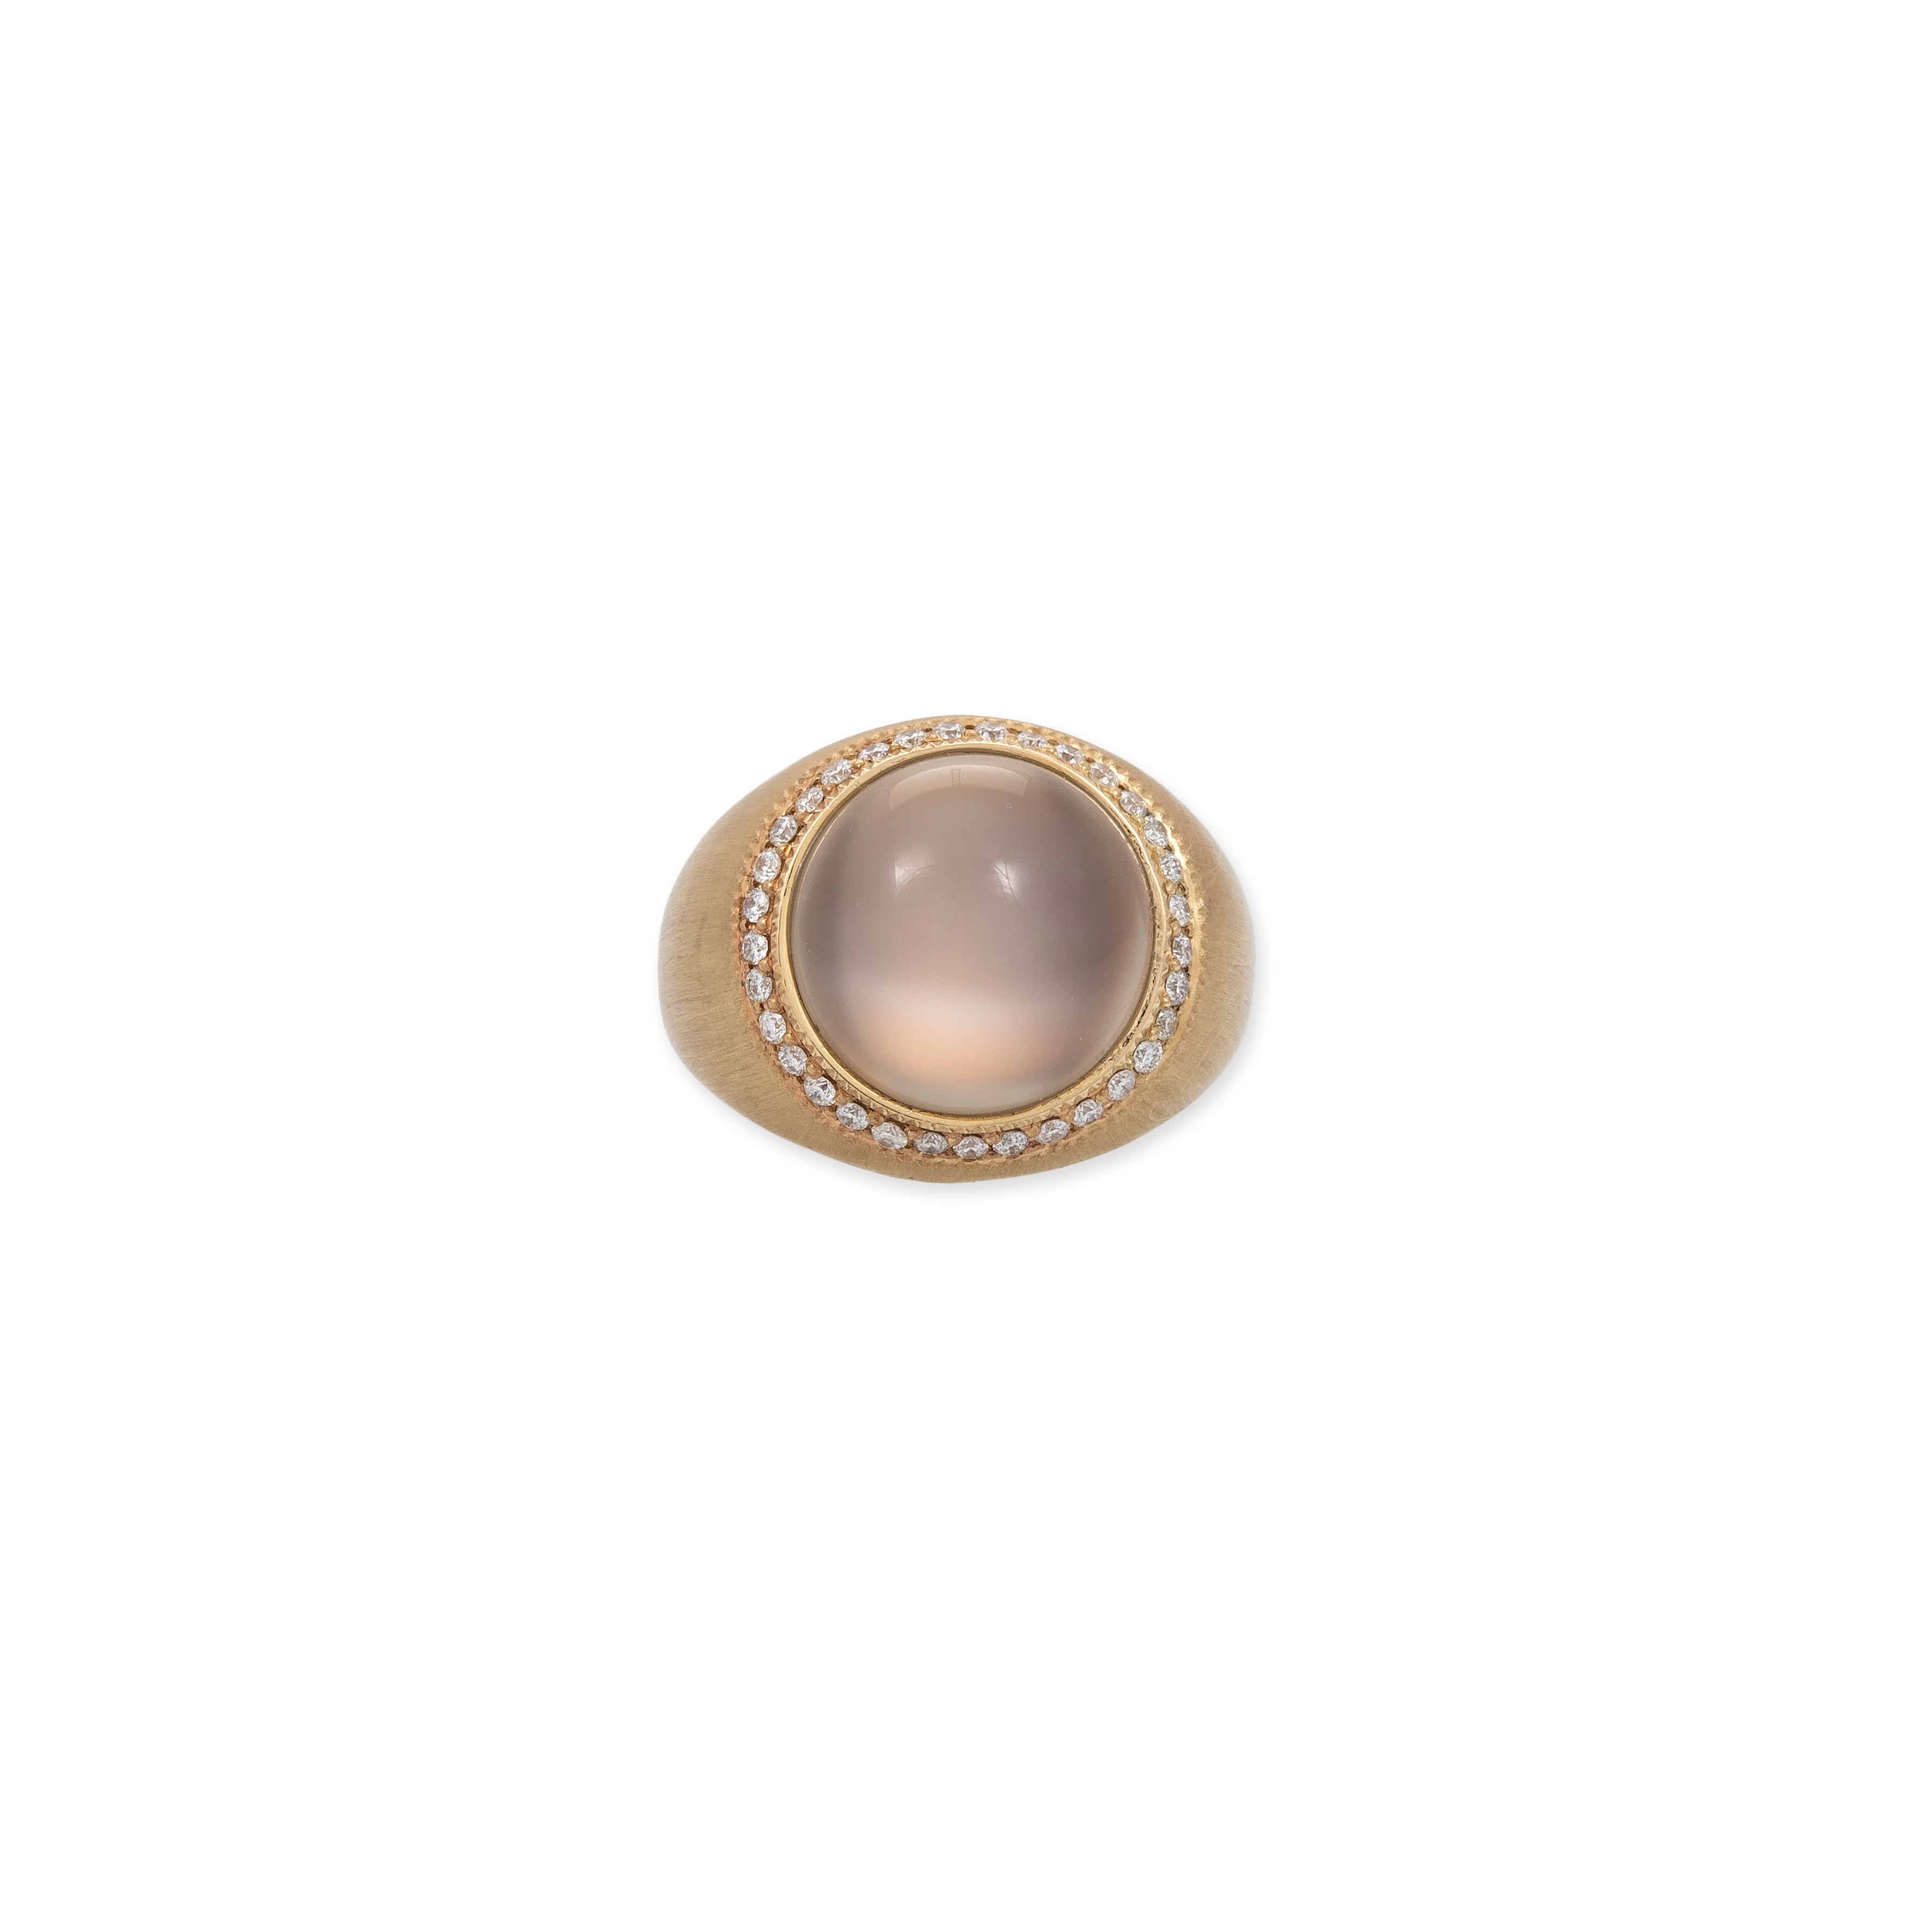 PAVE BORDER ROUND CATS EYE MOONSTONE RING